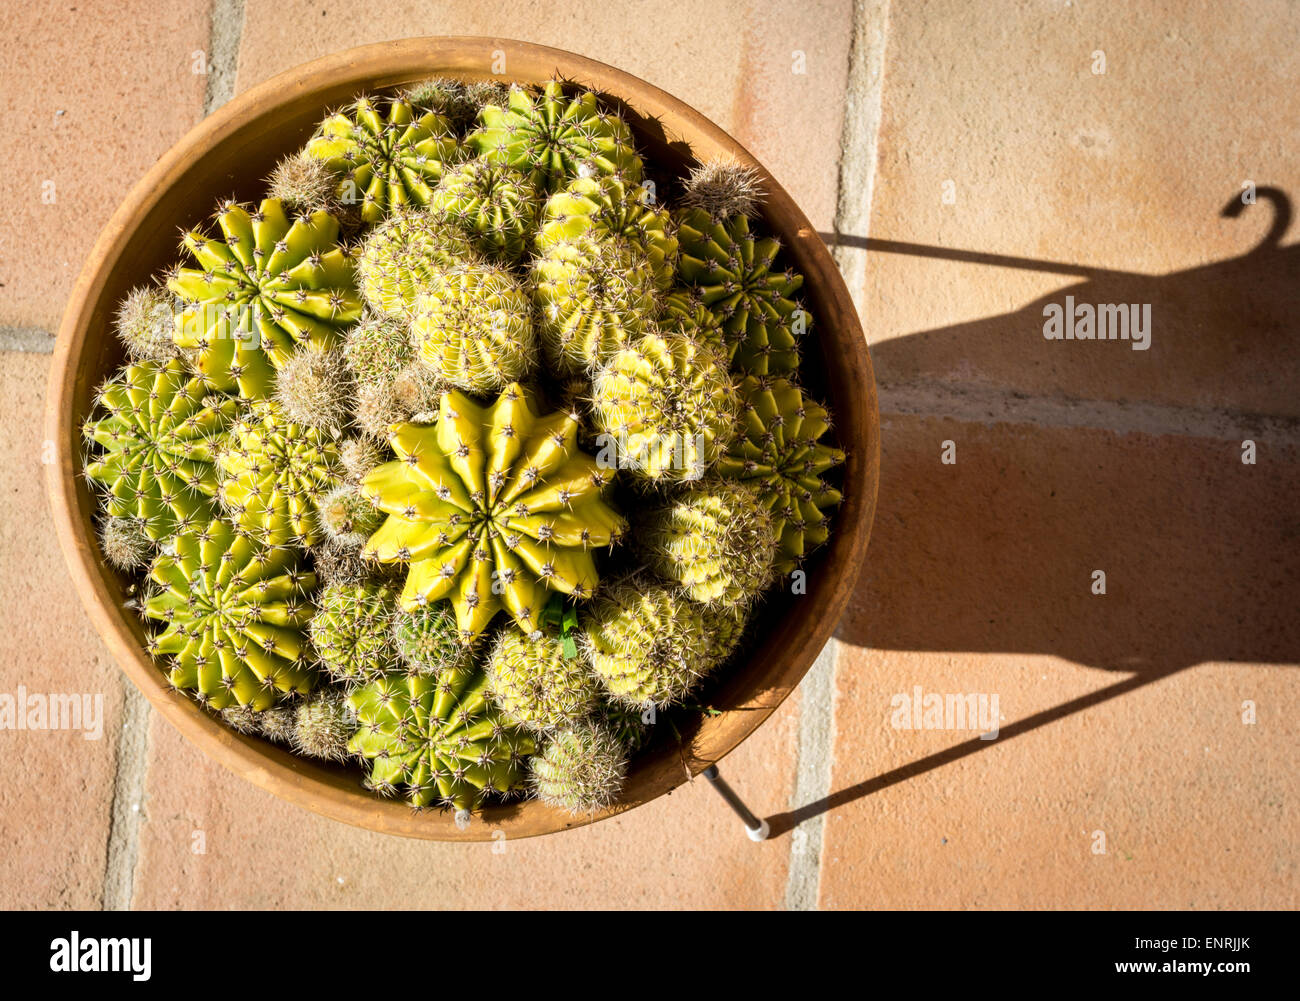 a-bowl-of-mixed-cactii-shown-in-sunny-co